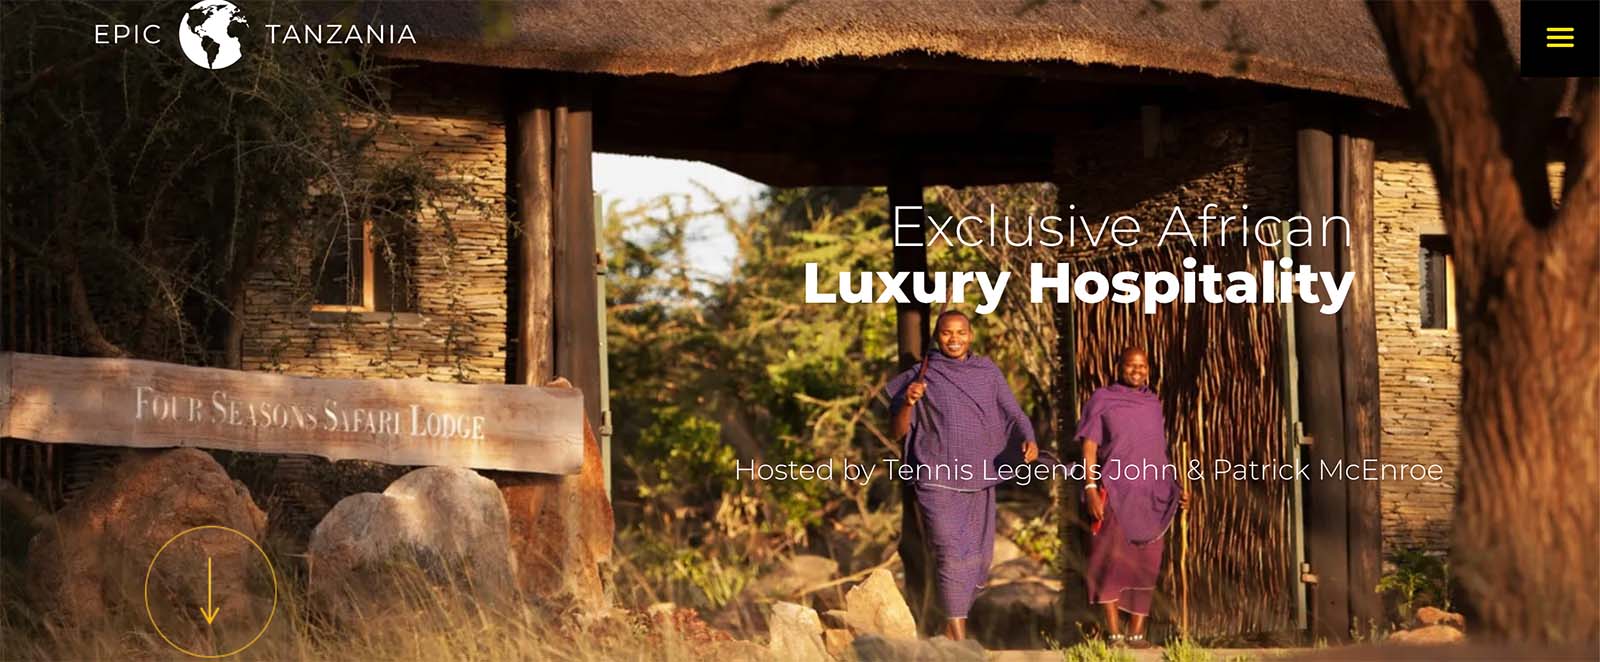 Promotional website image featuring purple robed Maasai